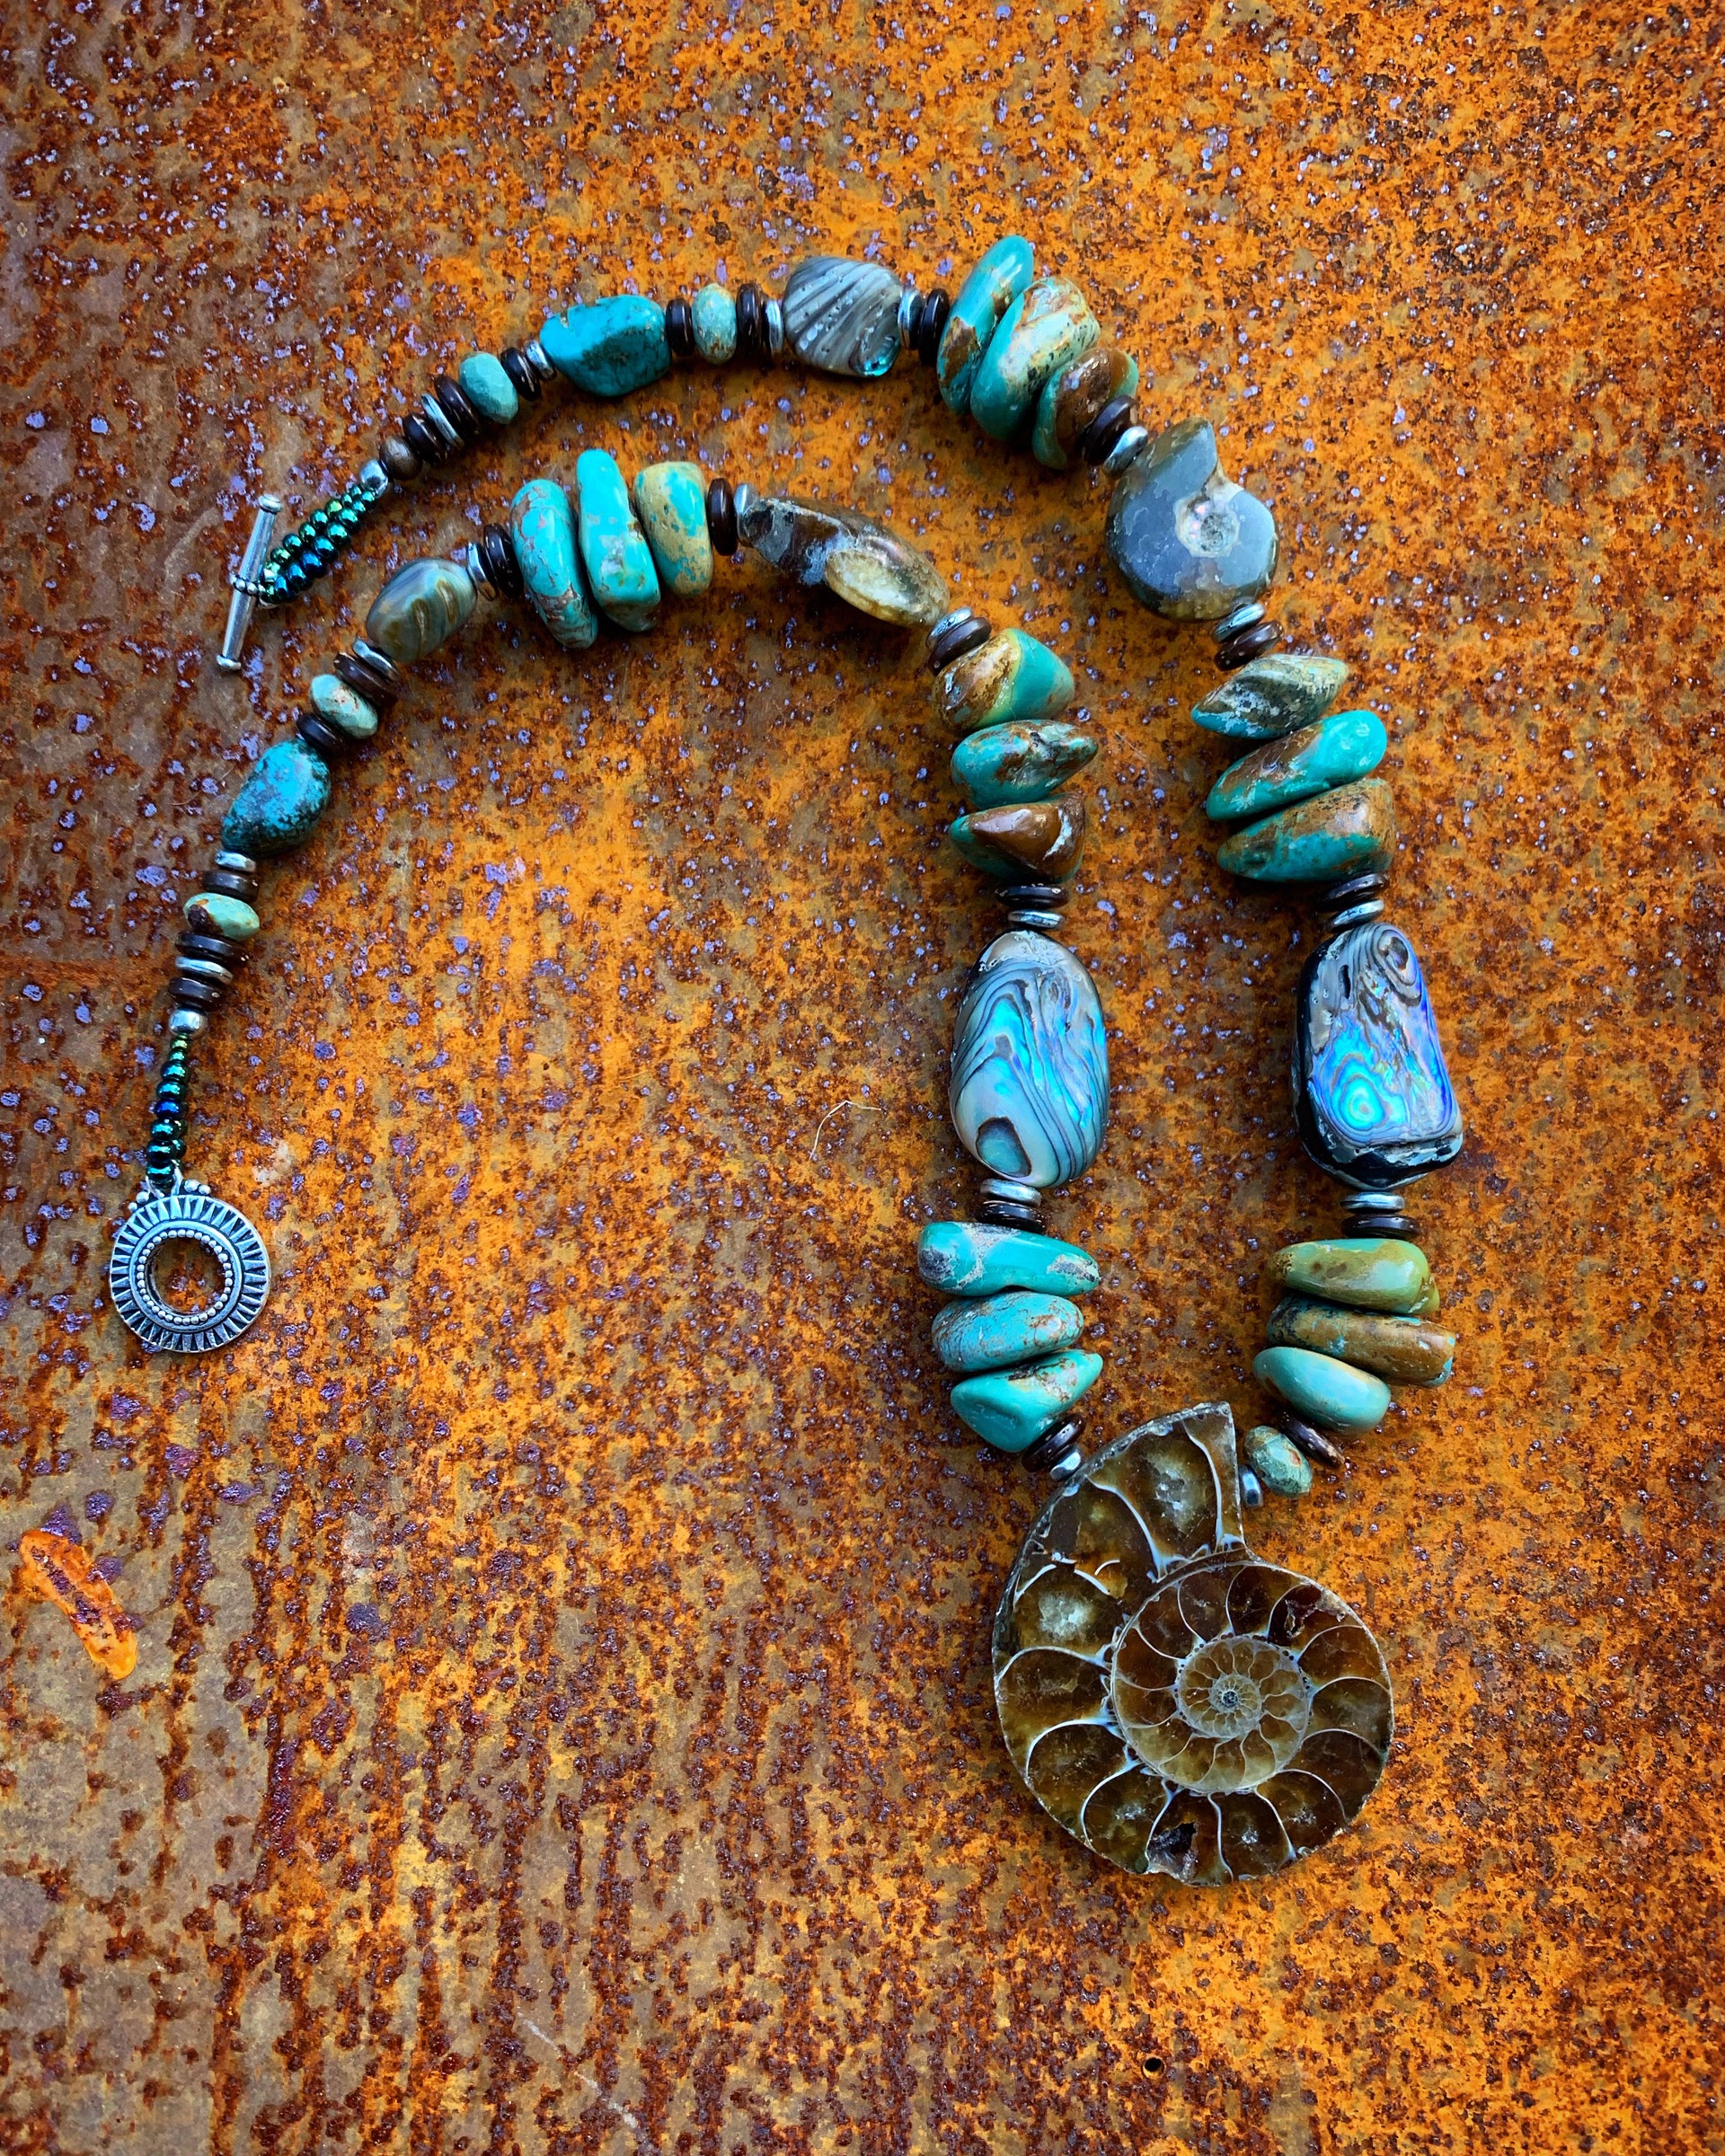 K484 Large Ammonite, Turquoise, and Abalone Necklace by Kelly Ormsby